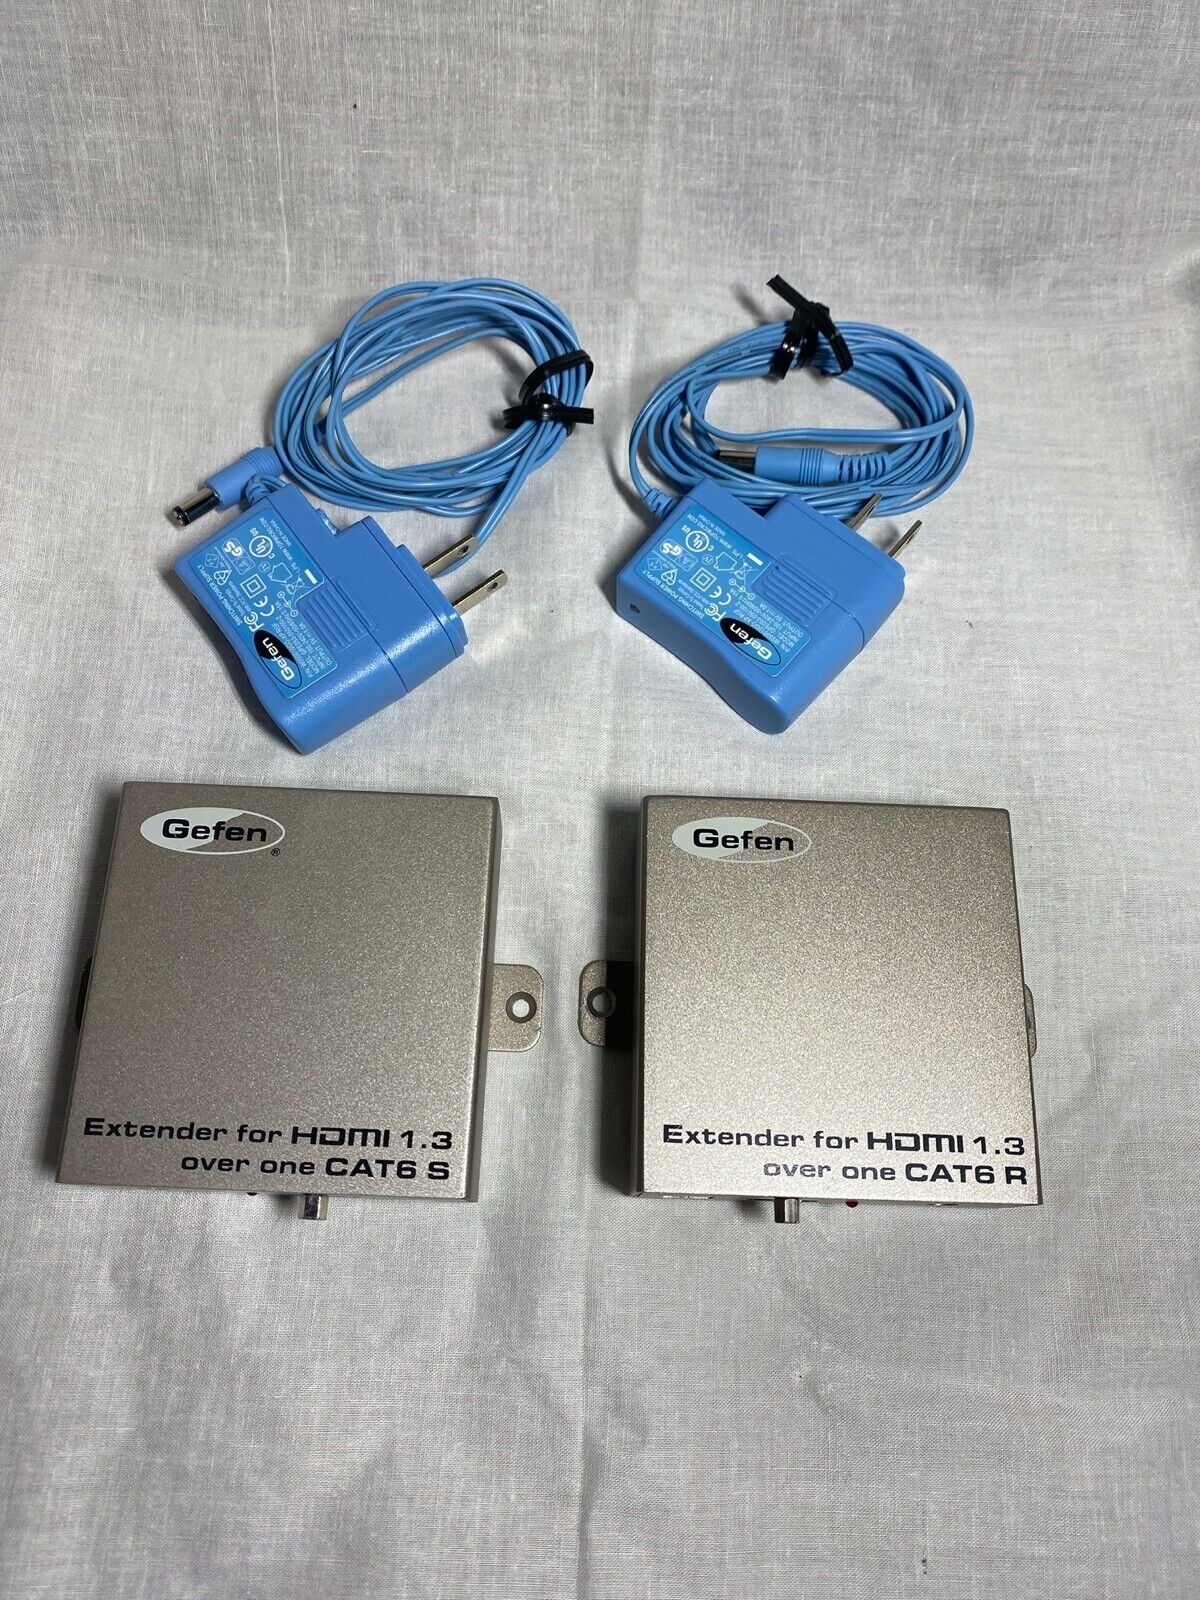 Gefen Extender for HDMI 1.3 over one Cat 6 with Ethernet EXT-HDMI 1.3 STP